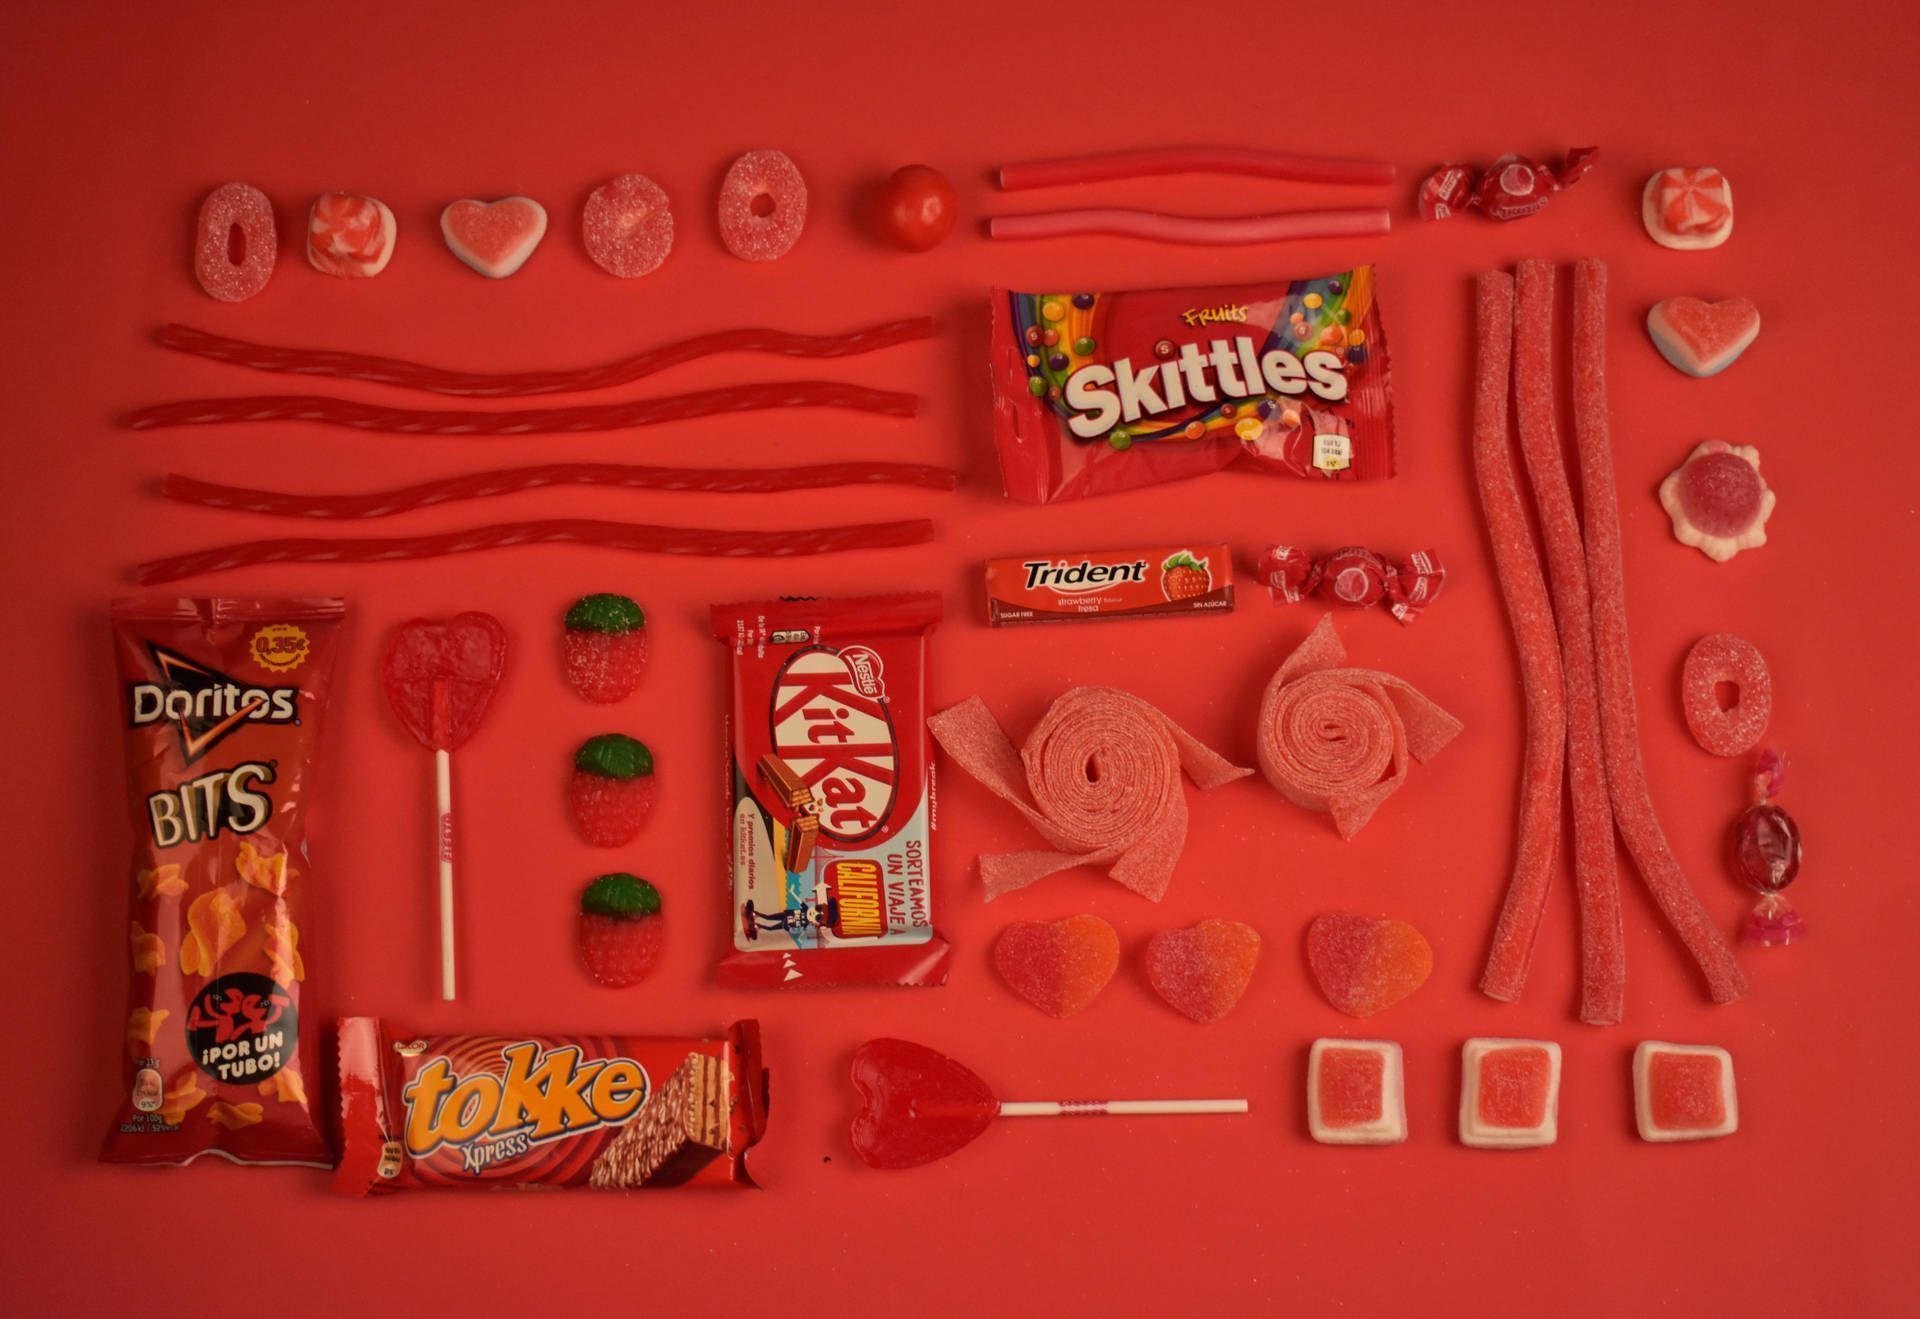 A flat lay of candy against a red background - Doritos